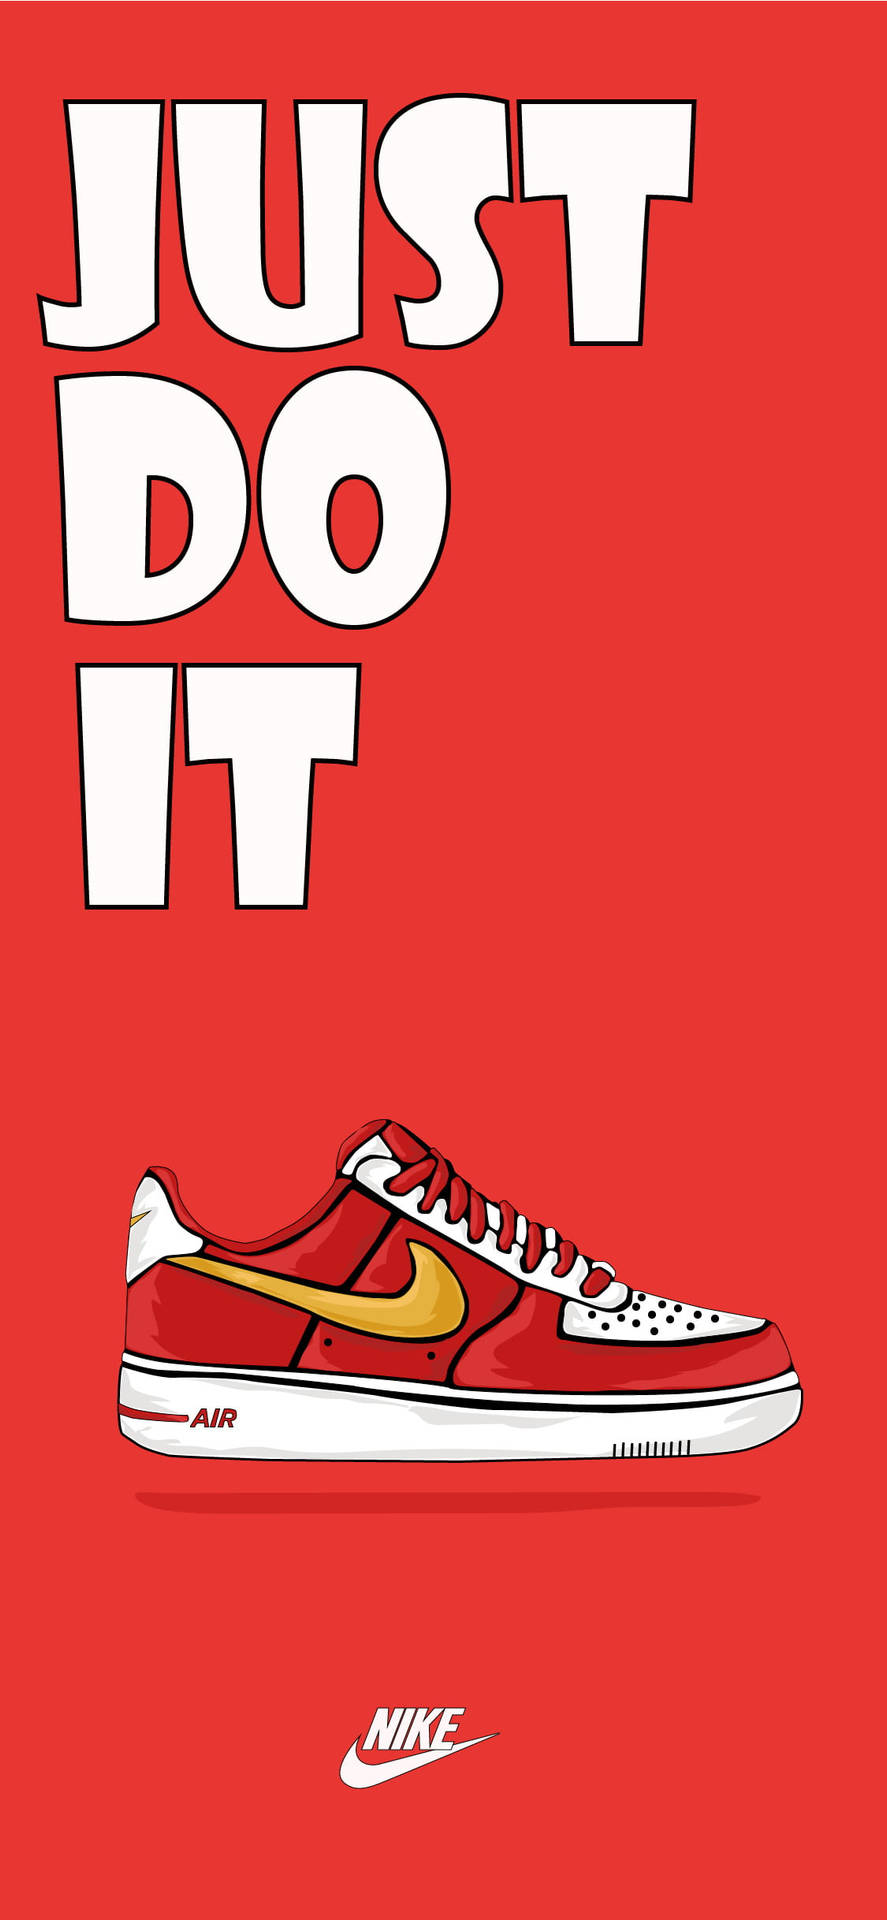 Free Just Do It Wallpaper Downloads, [100+] Just Do It Wallpapers for FREE  